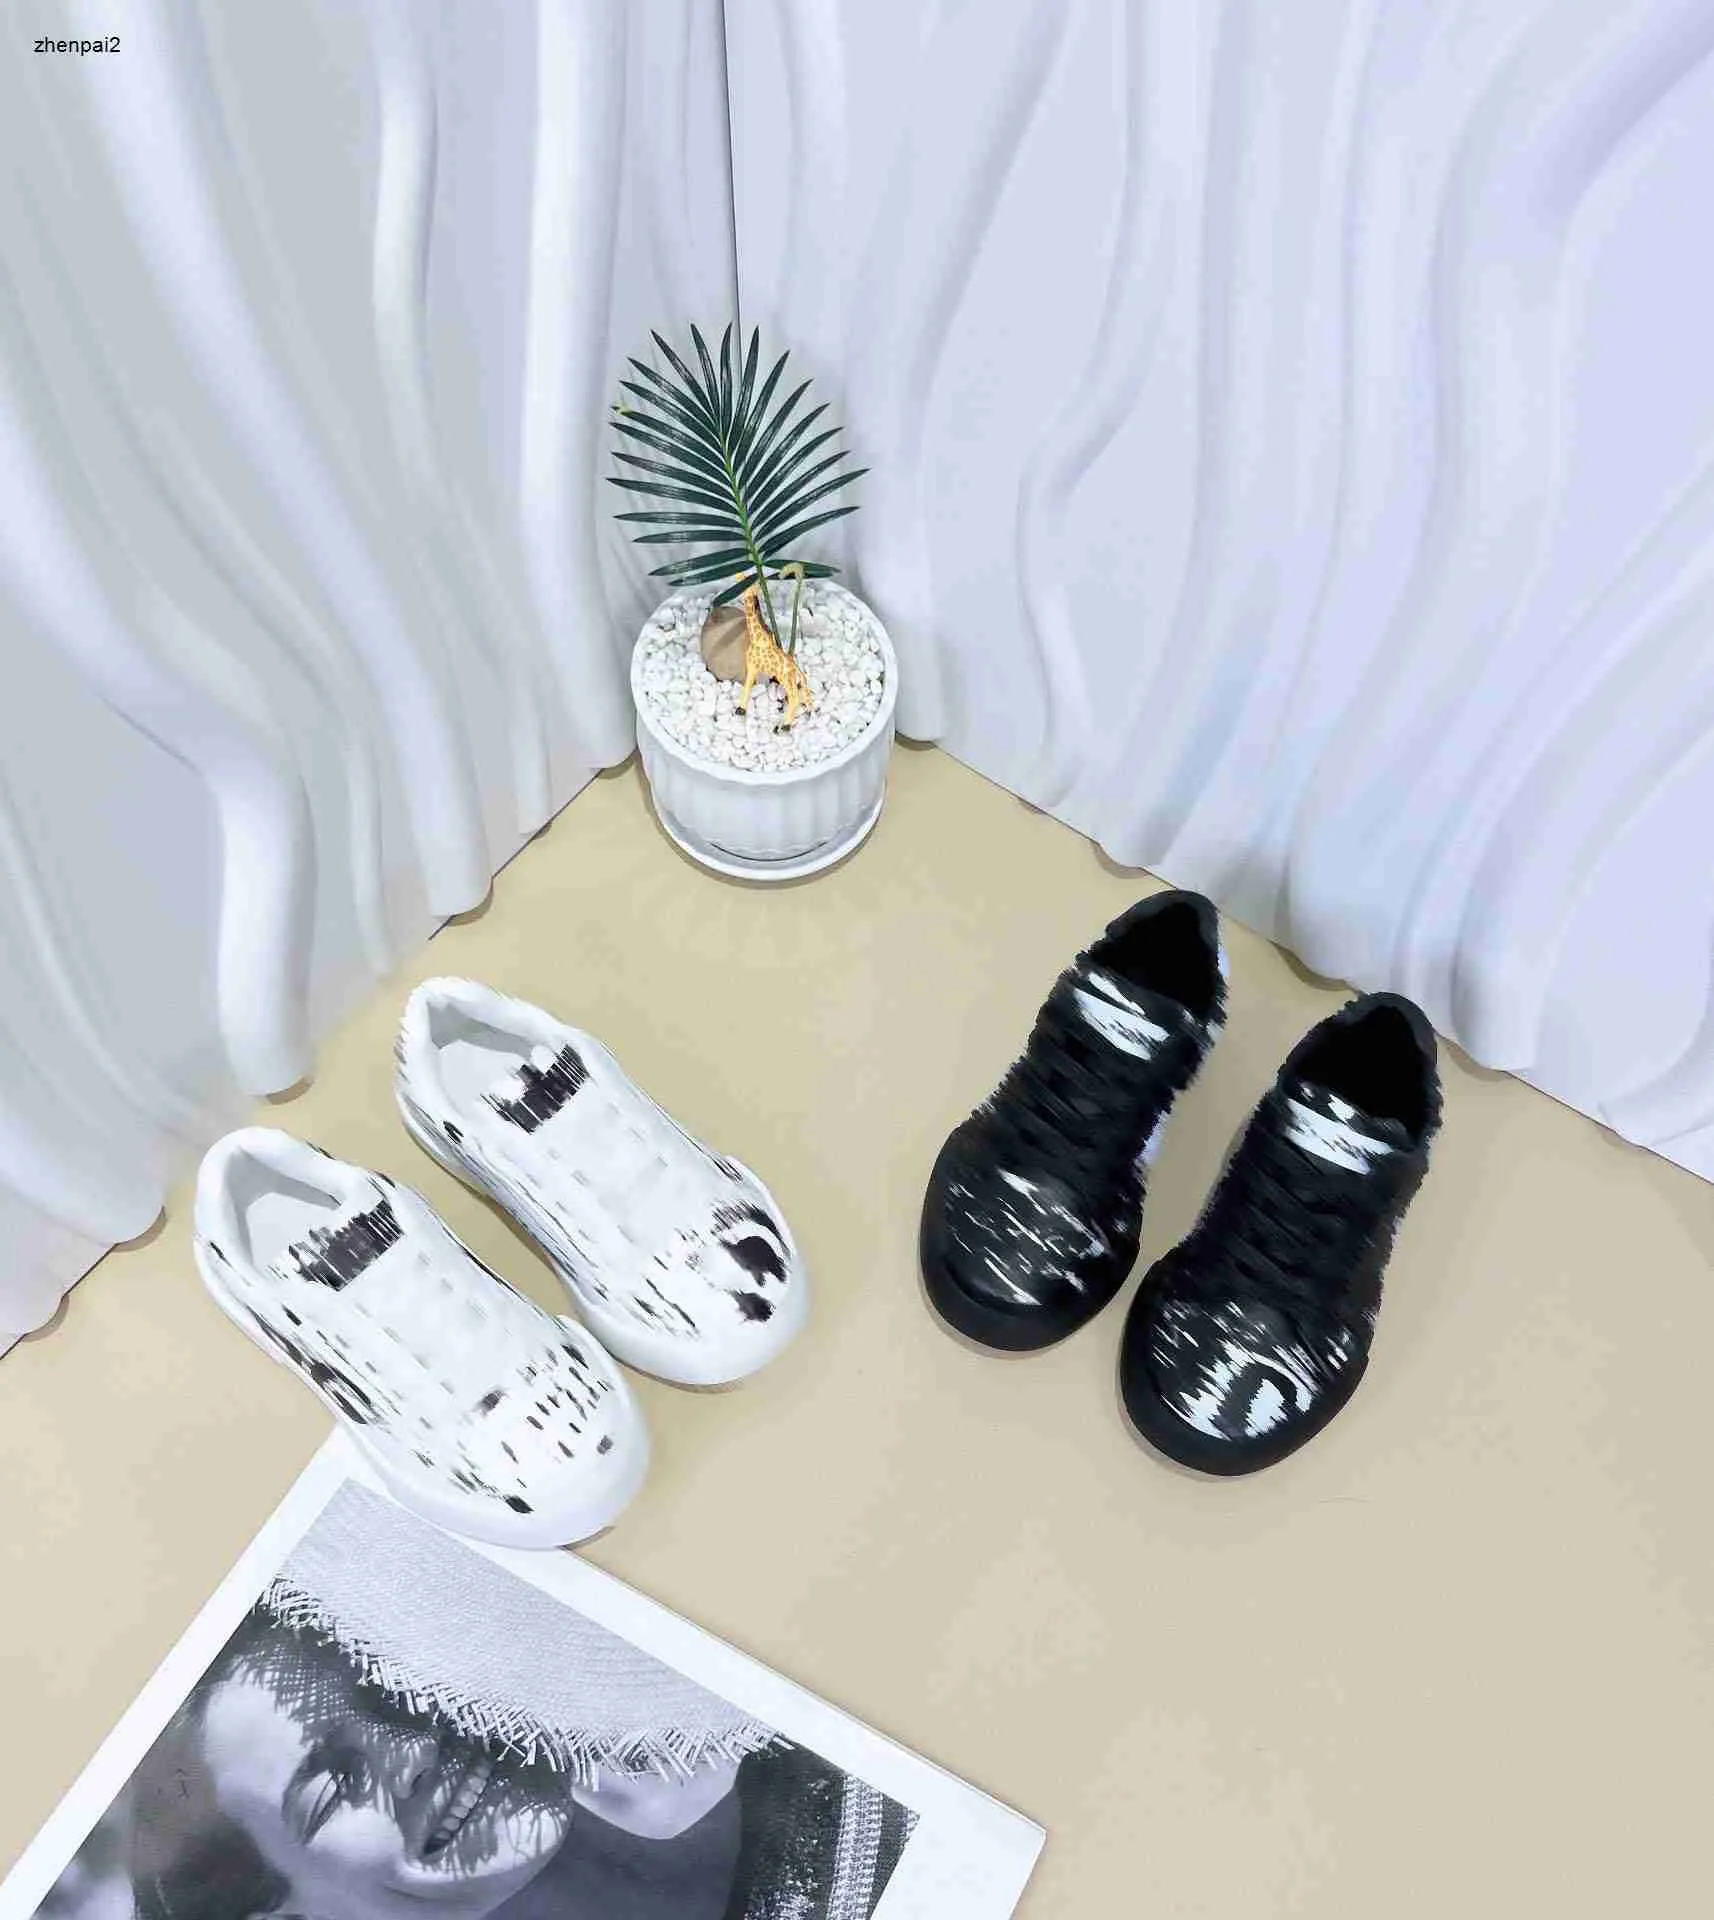 Luxury baby Sneakers Black and white graffiti design kids shoes Size 26-35 Box protection girls Casual board shoes boys shoes 24April